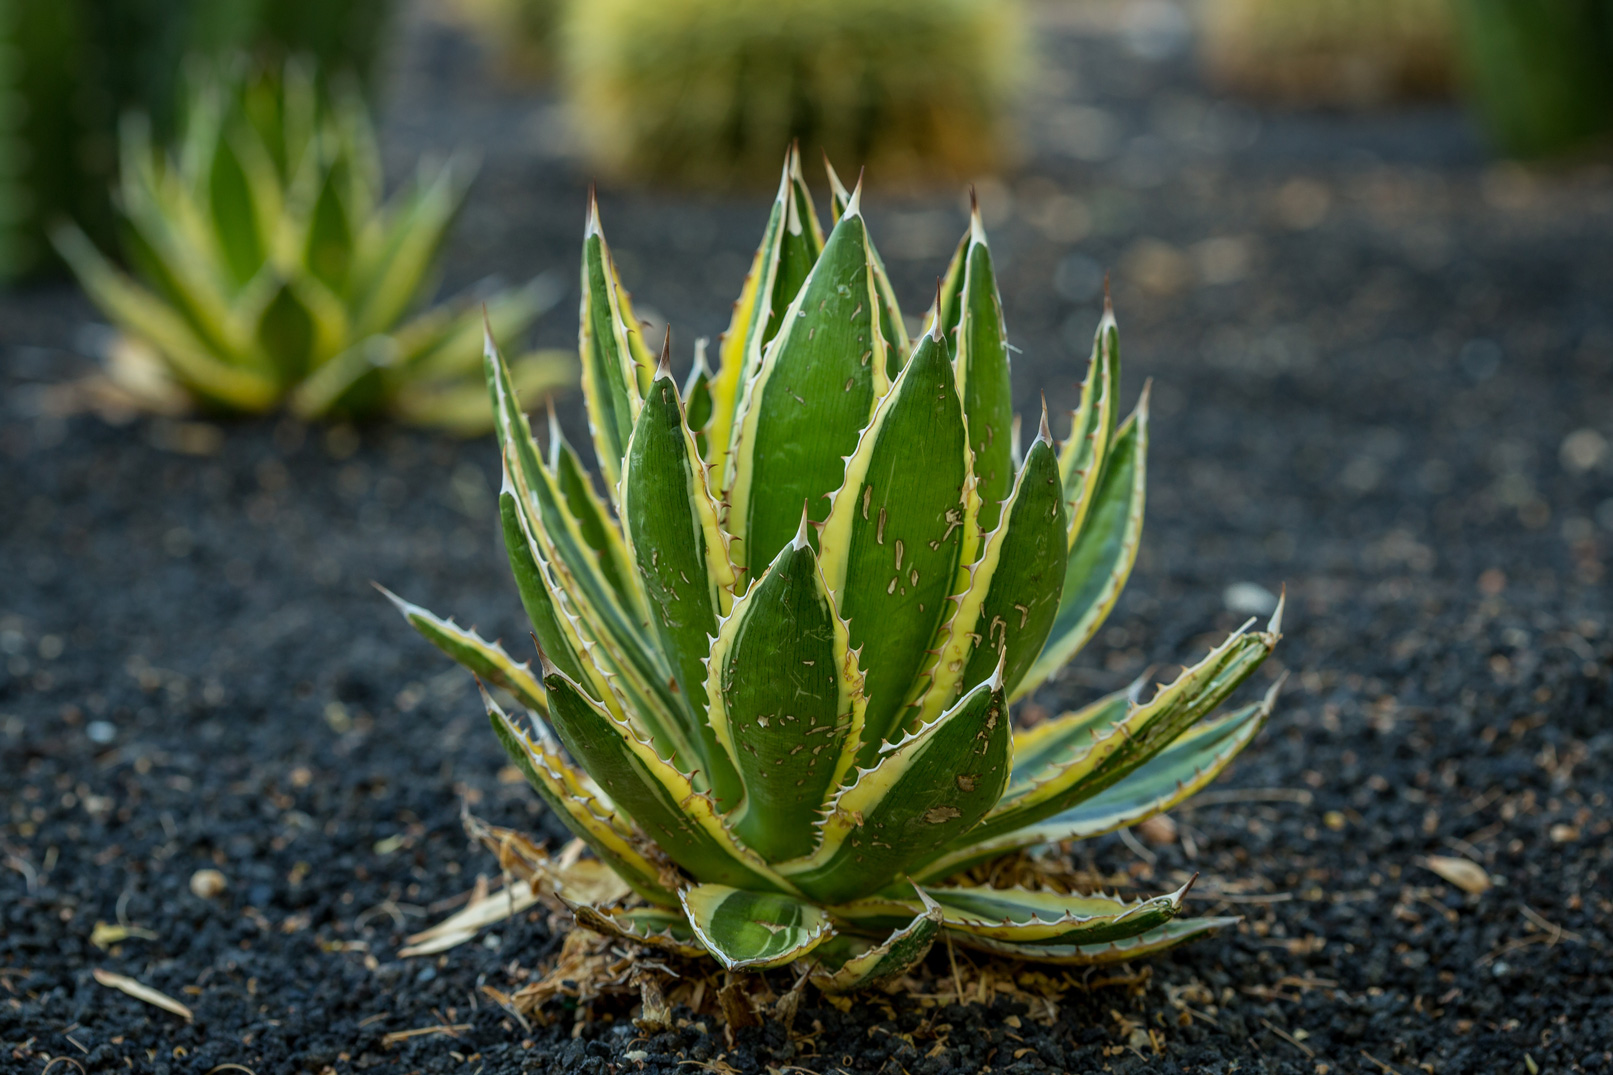 A Thorn-crested Agave in the specimen bed at Sunnylands Center and Gardens.